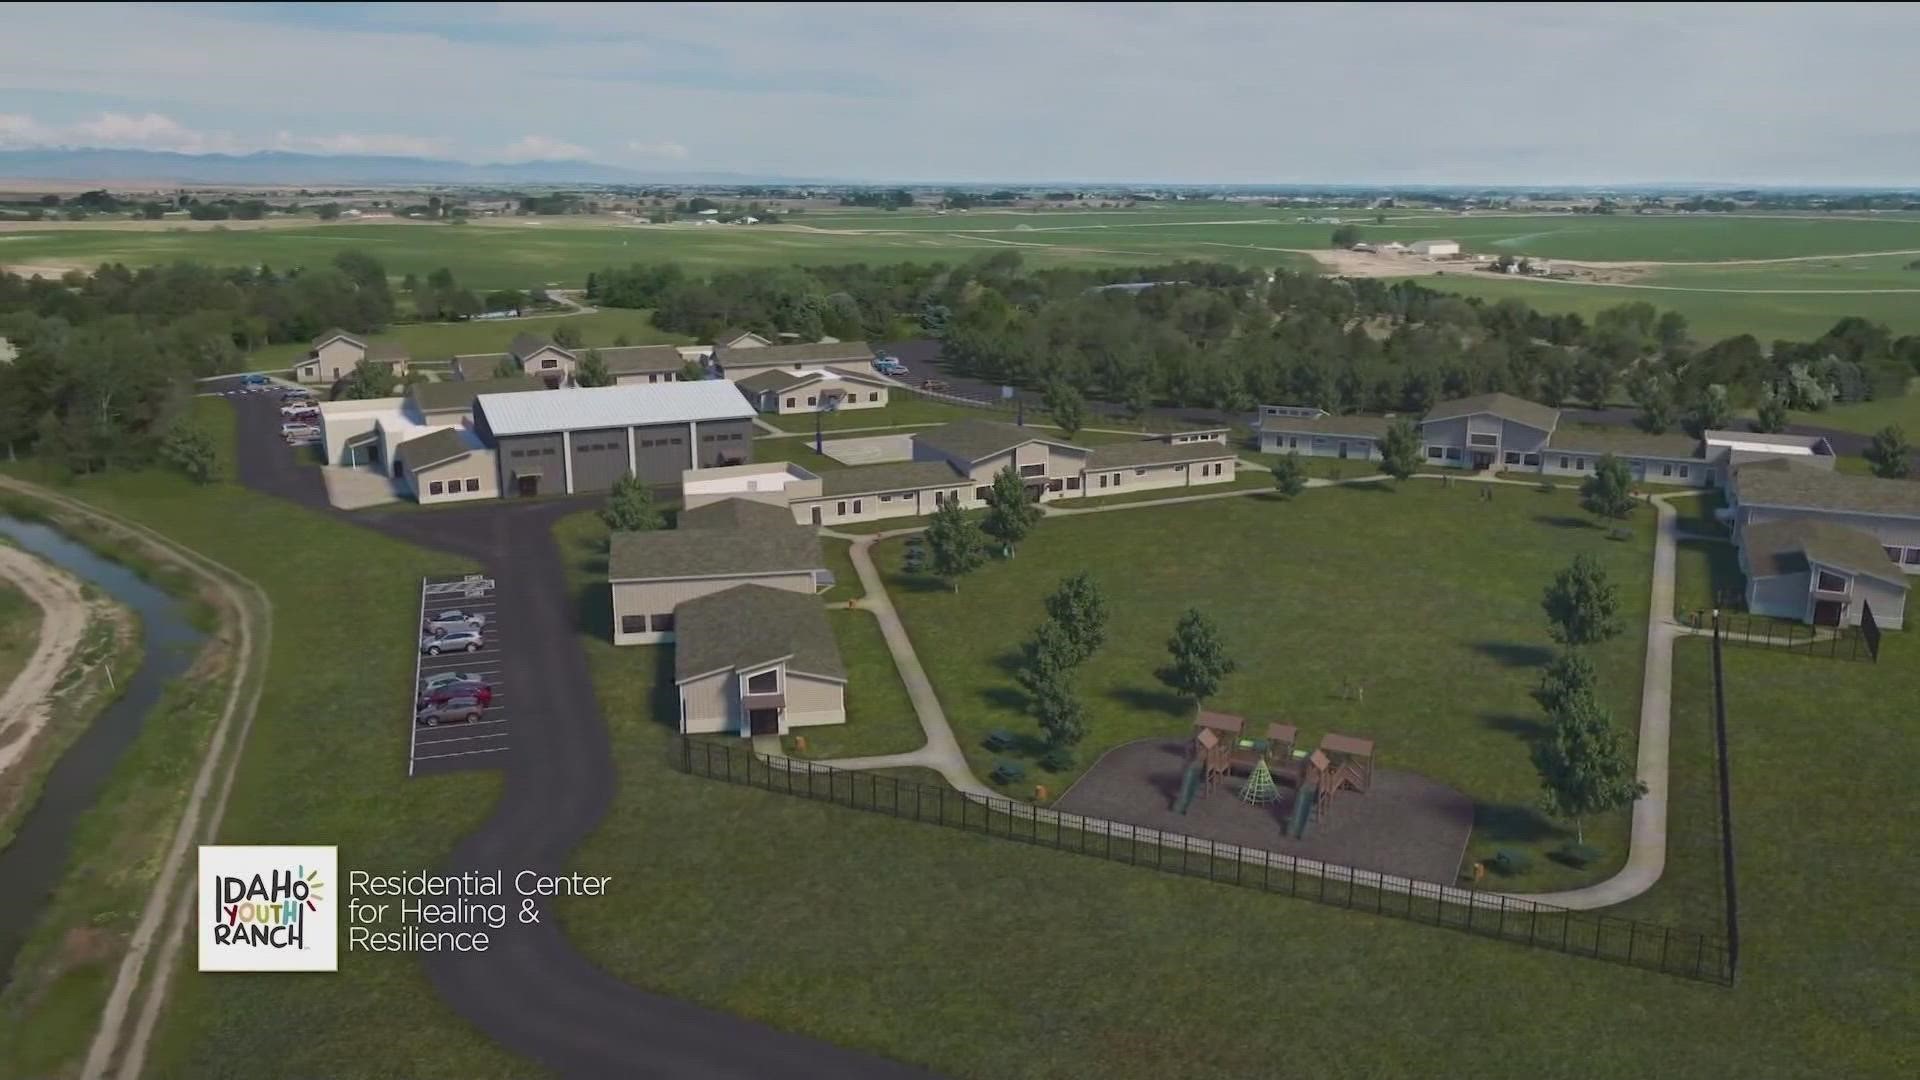 The Idaho Youth Ranch is hiring 114 people for its new Residential Center for Healing and Resilience, which is scheduled to open in 2023.